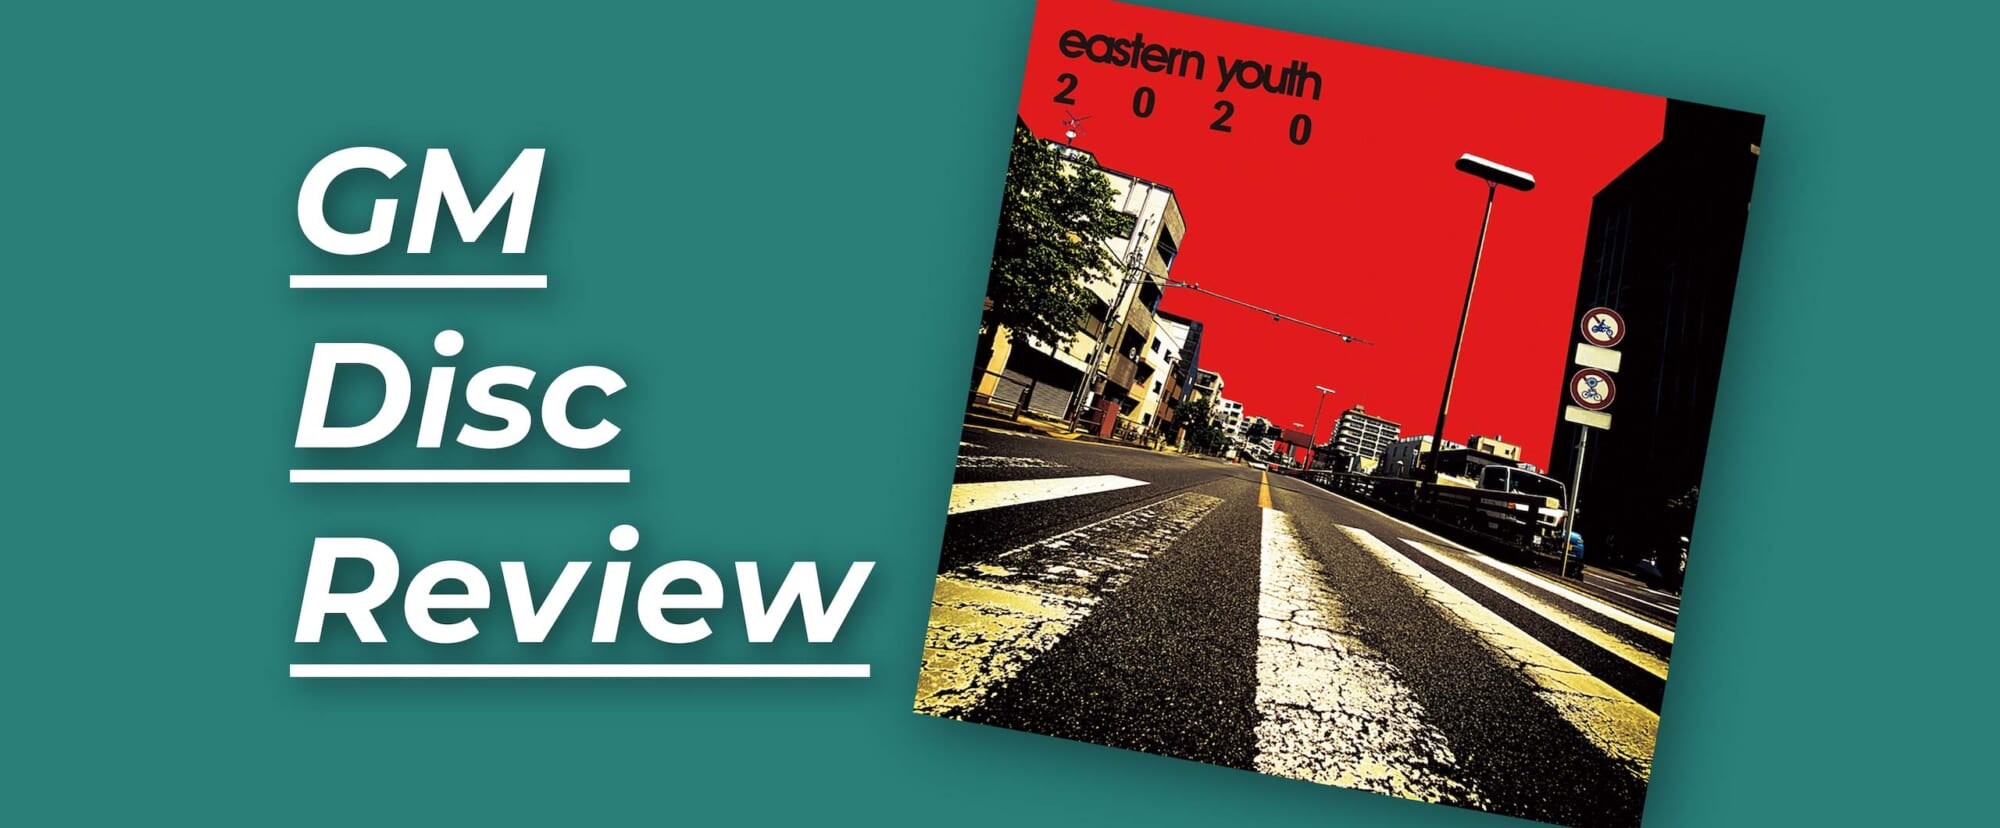 eastern youth『2020』